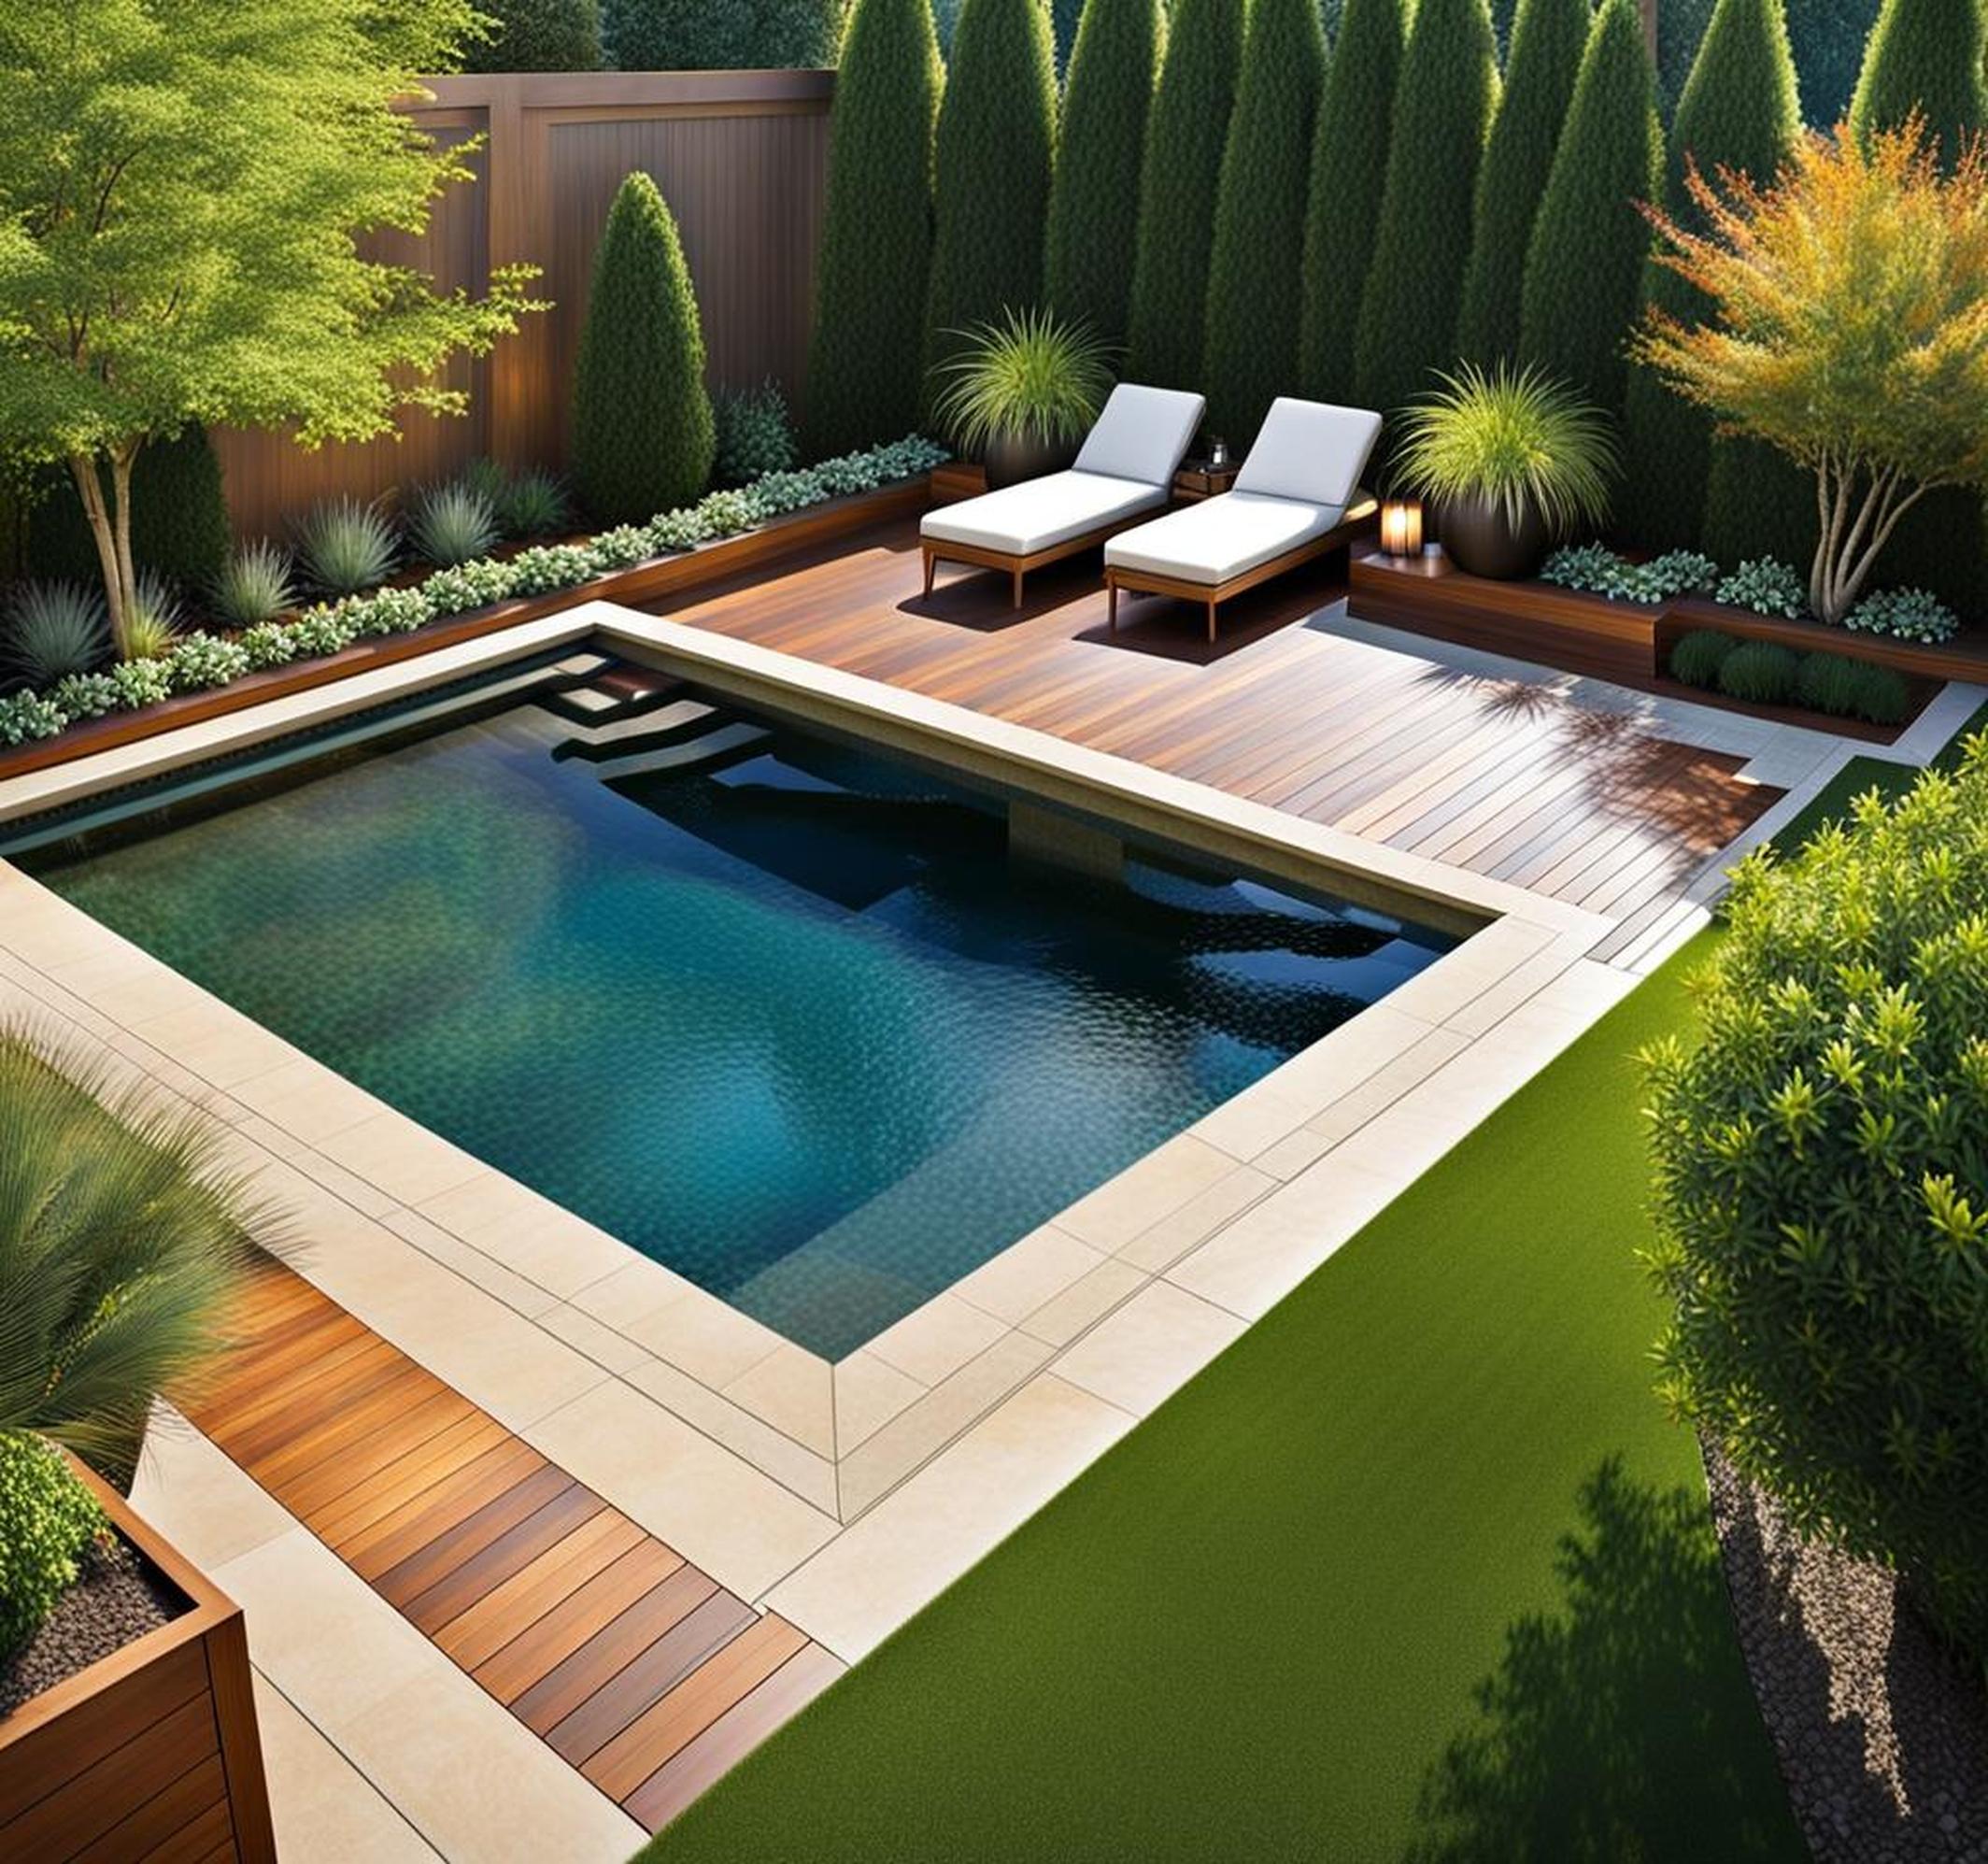 landscaping ideas to hide pool equipment